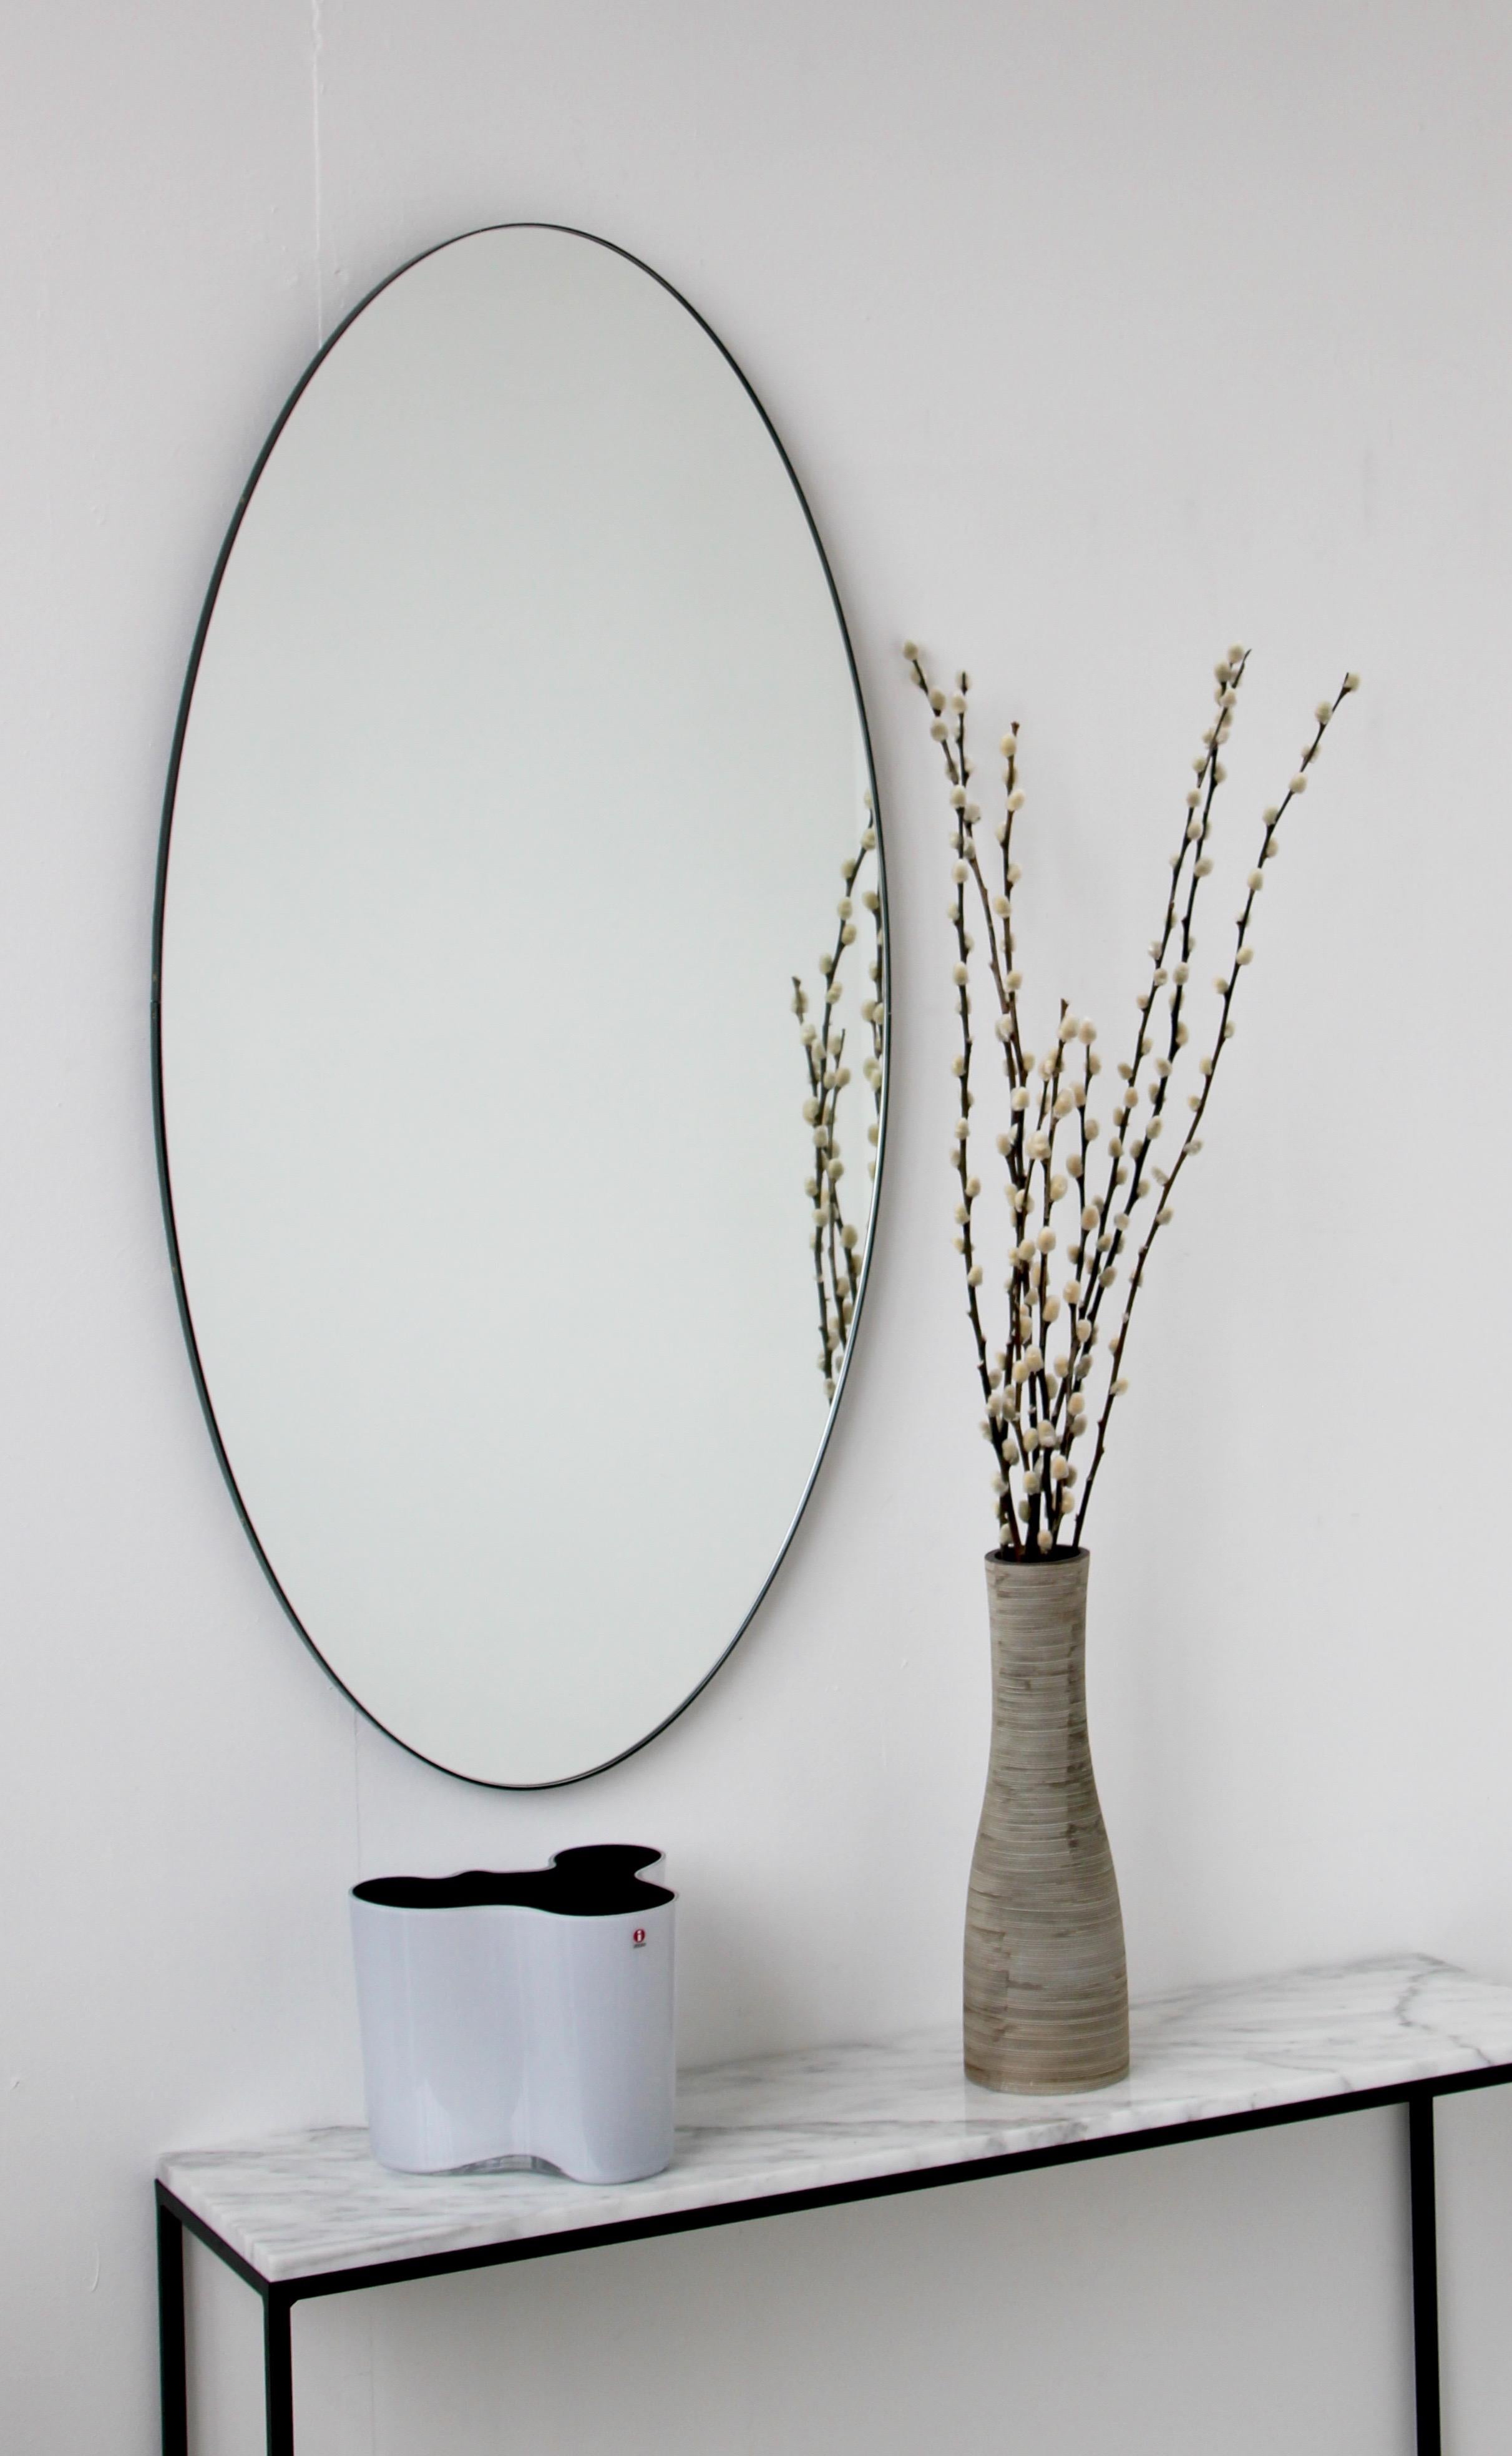 Delightful large oval mirror with a contemporary aluminium powder coated black frame. Designed and handcrafted in London, UK.

Medium, large and extra-large (37cm x 56cm, 46cm x 71cm and 48cm x 97cm) mirrors are fitted with an ingenious French cleat